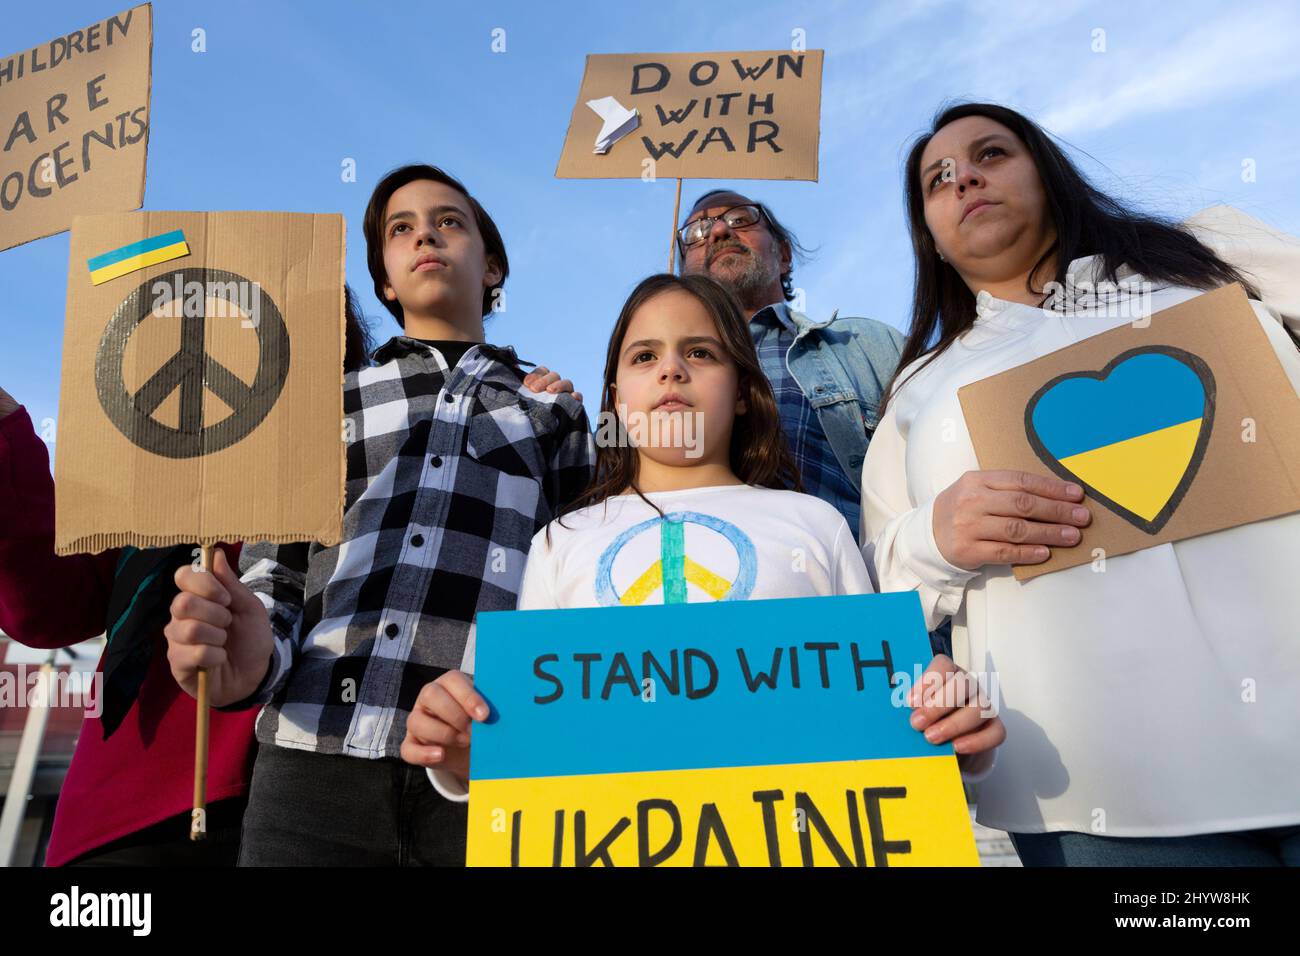 A group of peace demonstrators protest against the Russian invasion. They show Stop War posters and flags with Ukrainian colors. Stock Photo